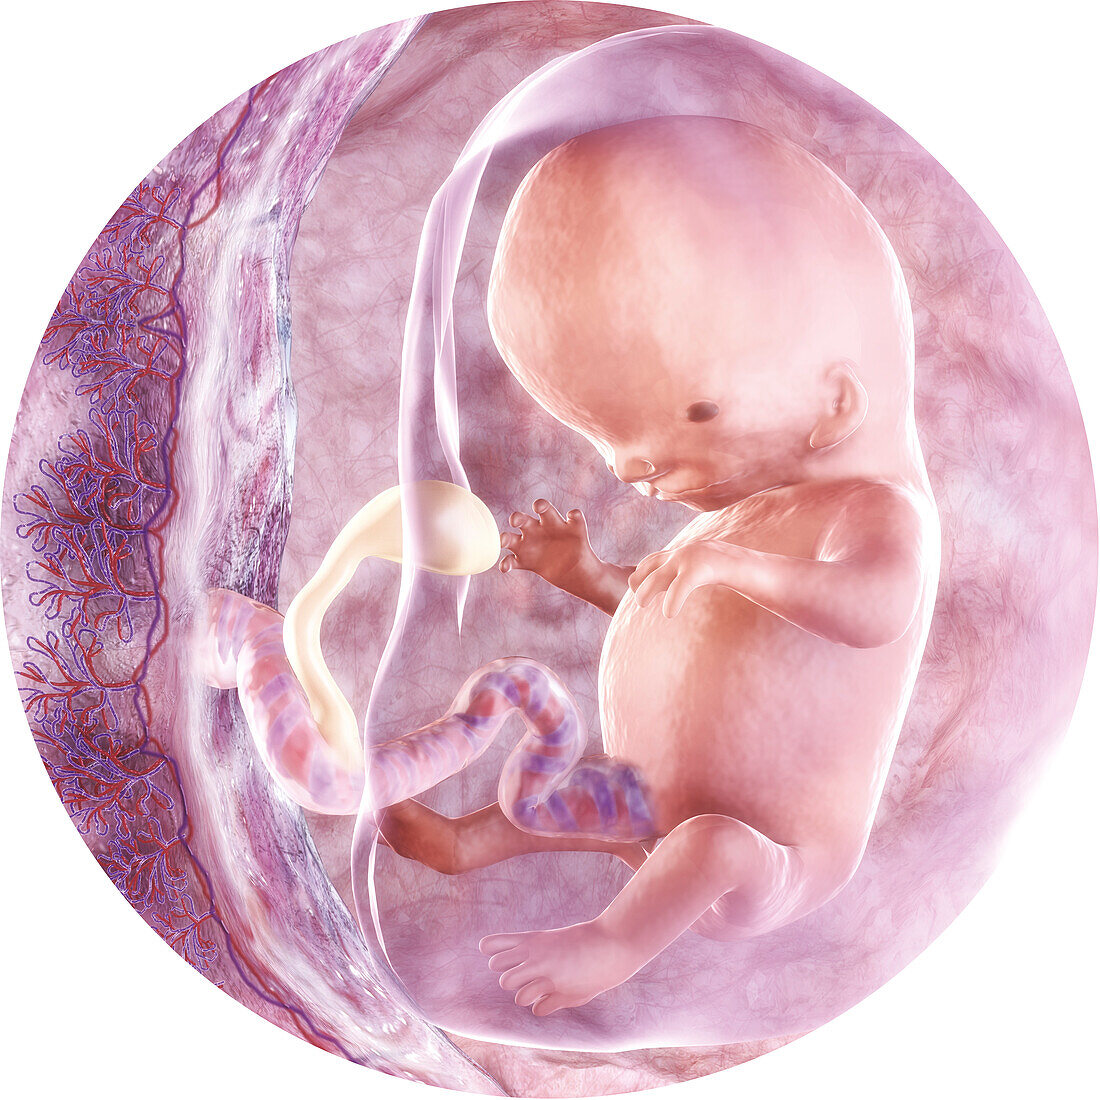 Developing embryo in the womb at 10 weeks, illustration